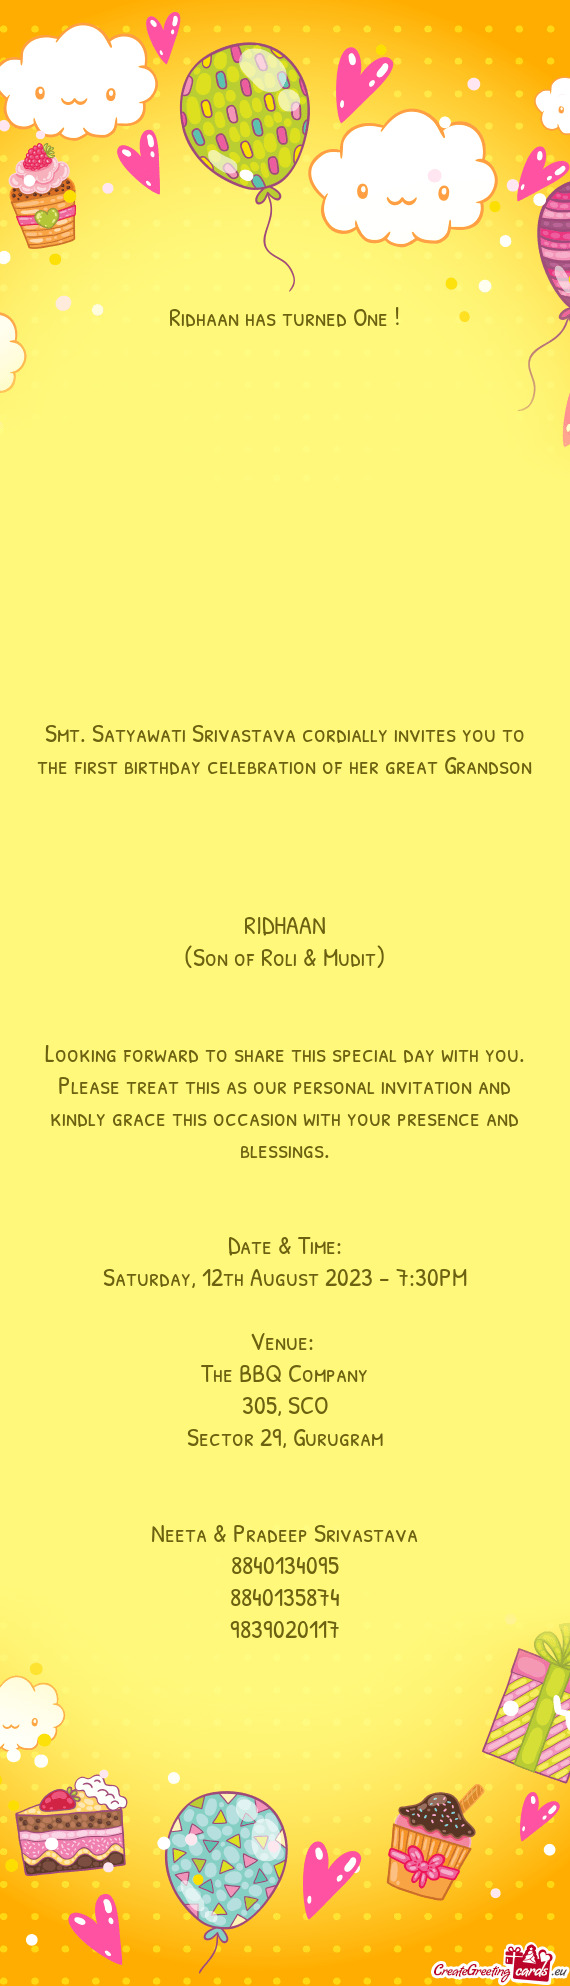 Satyawati Srivastava cordially invites you to the first birthday celebration of her great Grandson